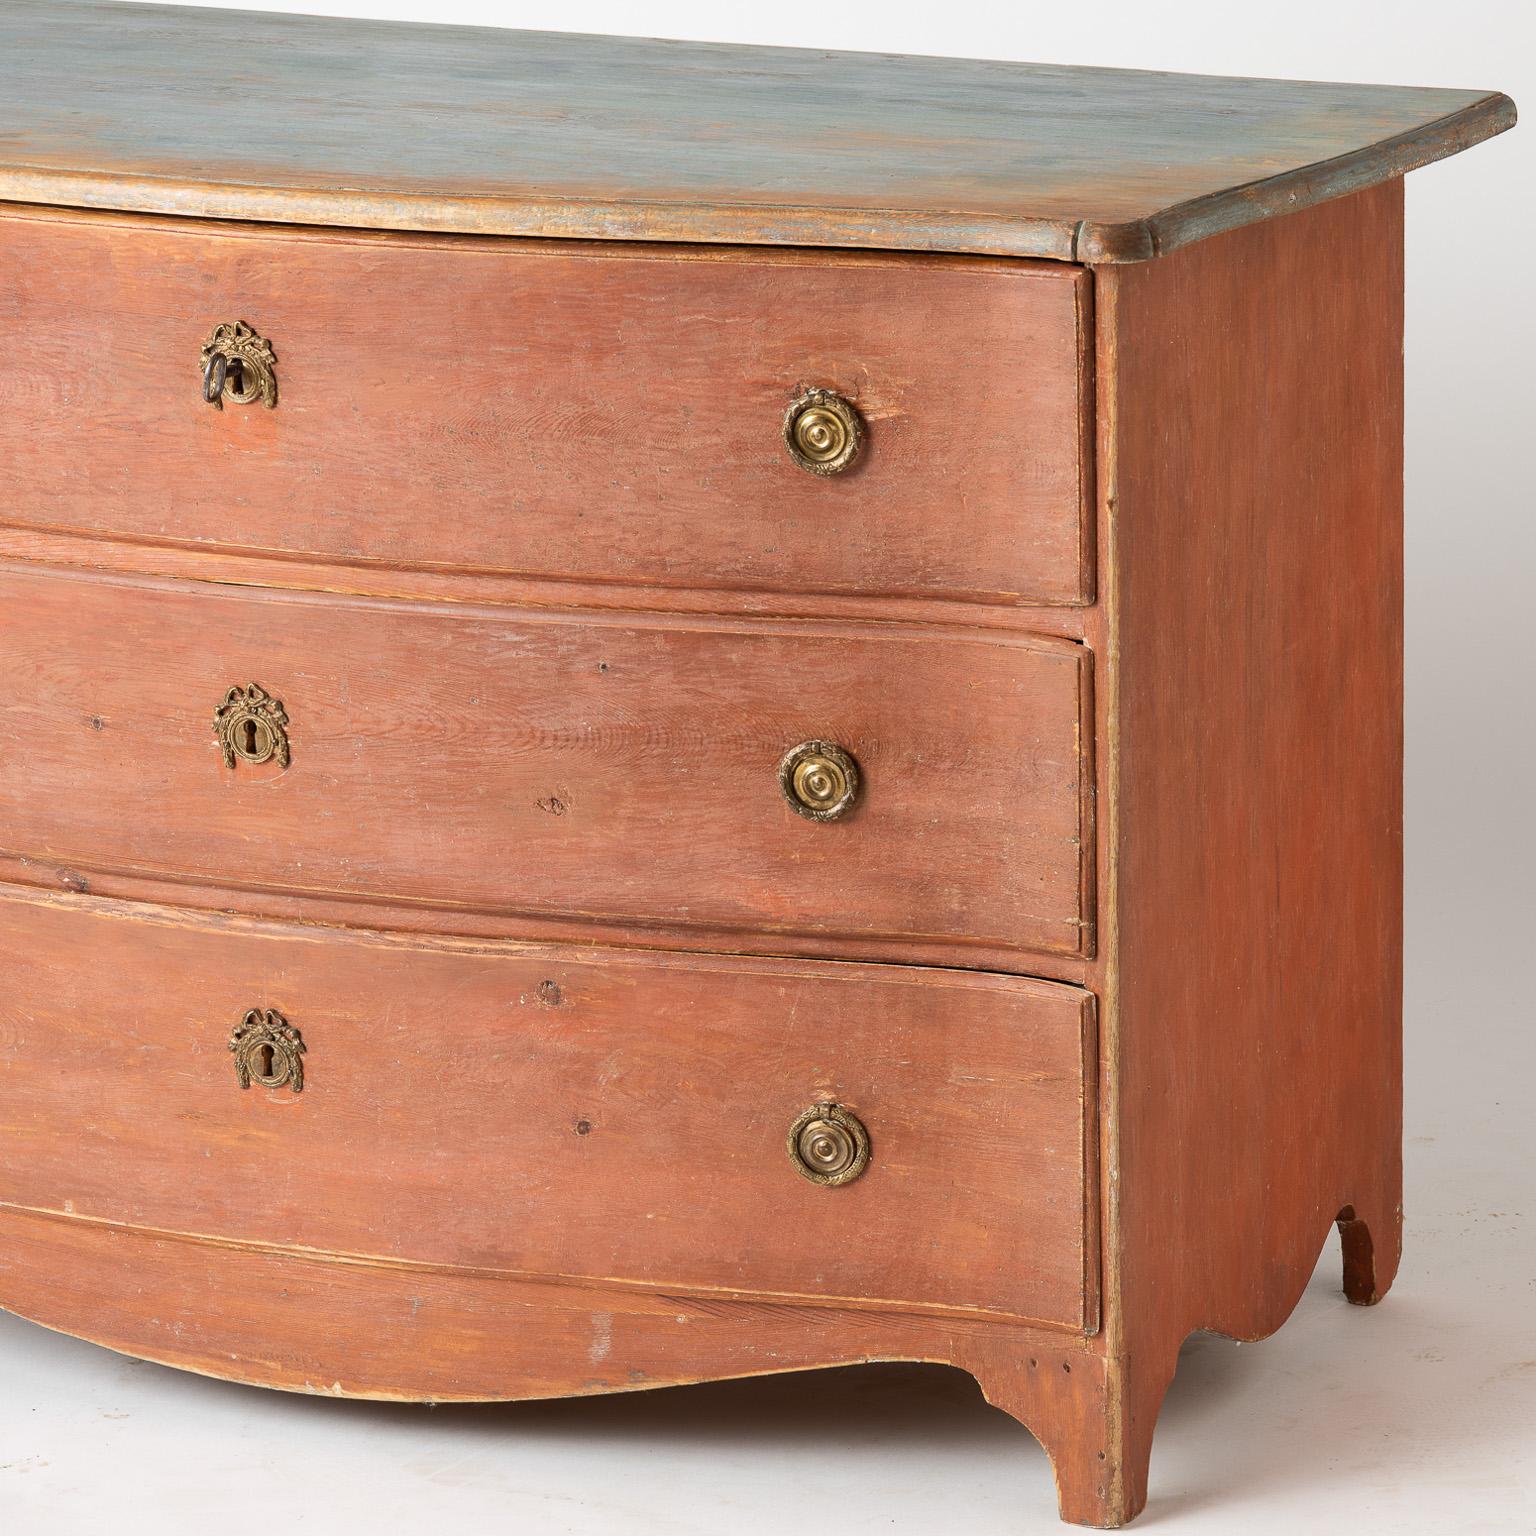 This graceful serpentine chest, in a wonderful shade of coral paint, comes from the north of Sweden. It has the original hardware featuring a brass bow detail on the drawer pulls and escutcheons. The traces of original blue paint on the top have